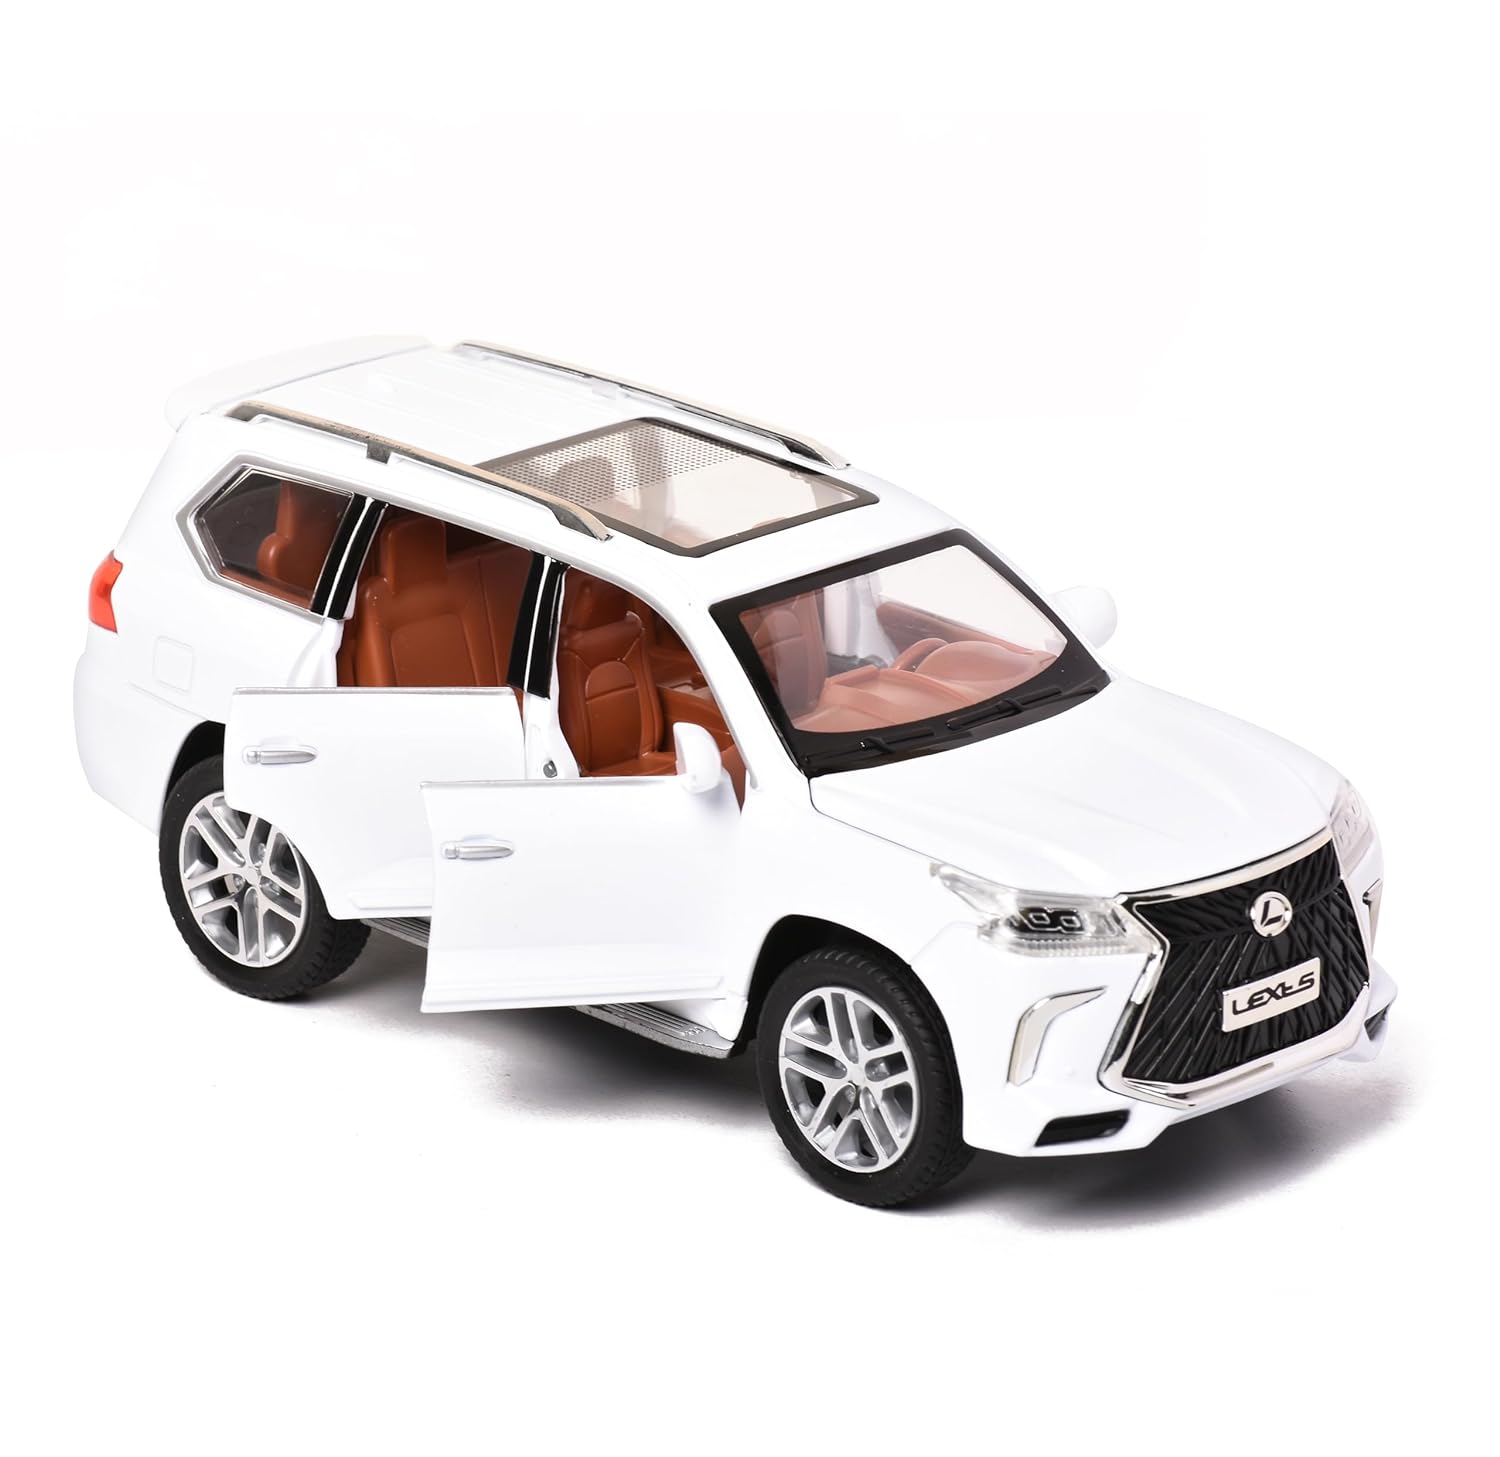 Braintastic Model Diecast Car Toy Vehicle Pull Back Friction Car with Openable Doors Light & Music Toys for Kids Age 3+ Years (Lexus White)